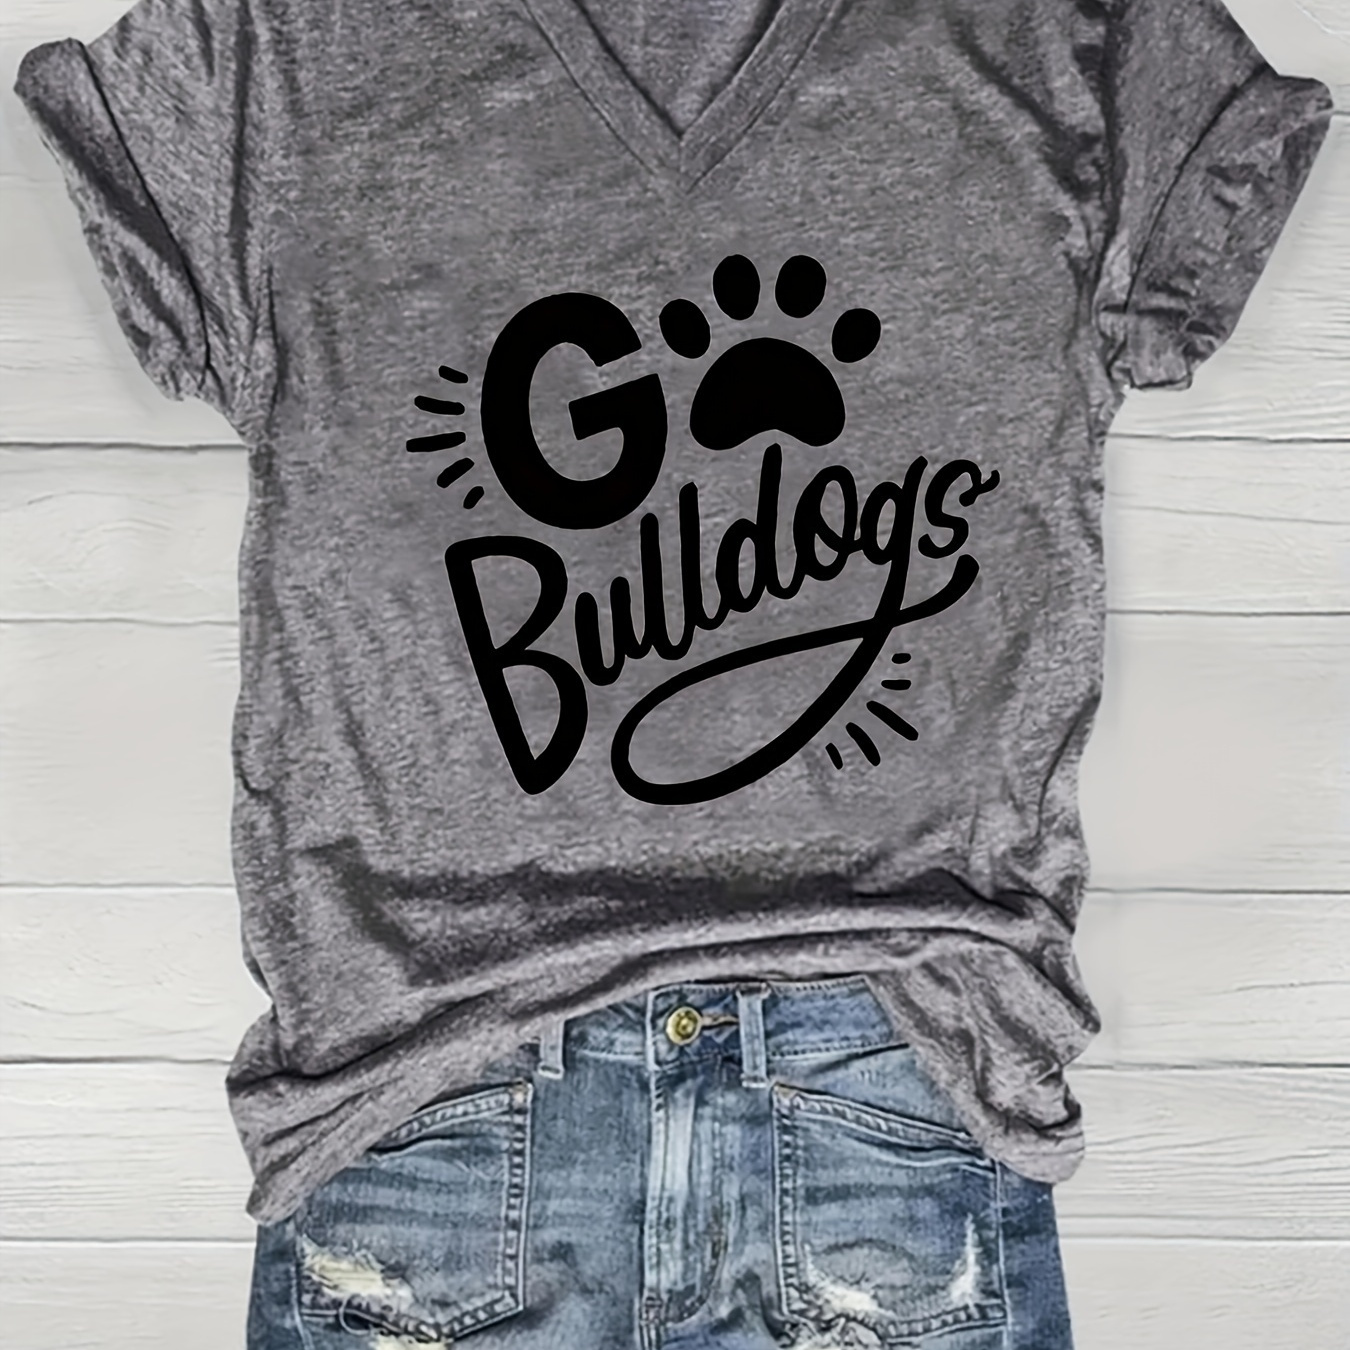 

Bulldogs & Paw Print T-shirt, Casual Short Sleeve Crew Neck Top For Spring & Summer, Women's Clothing